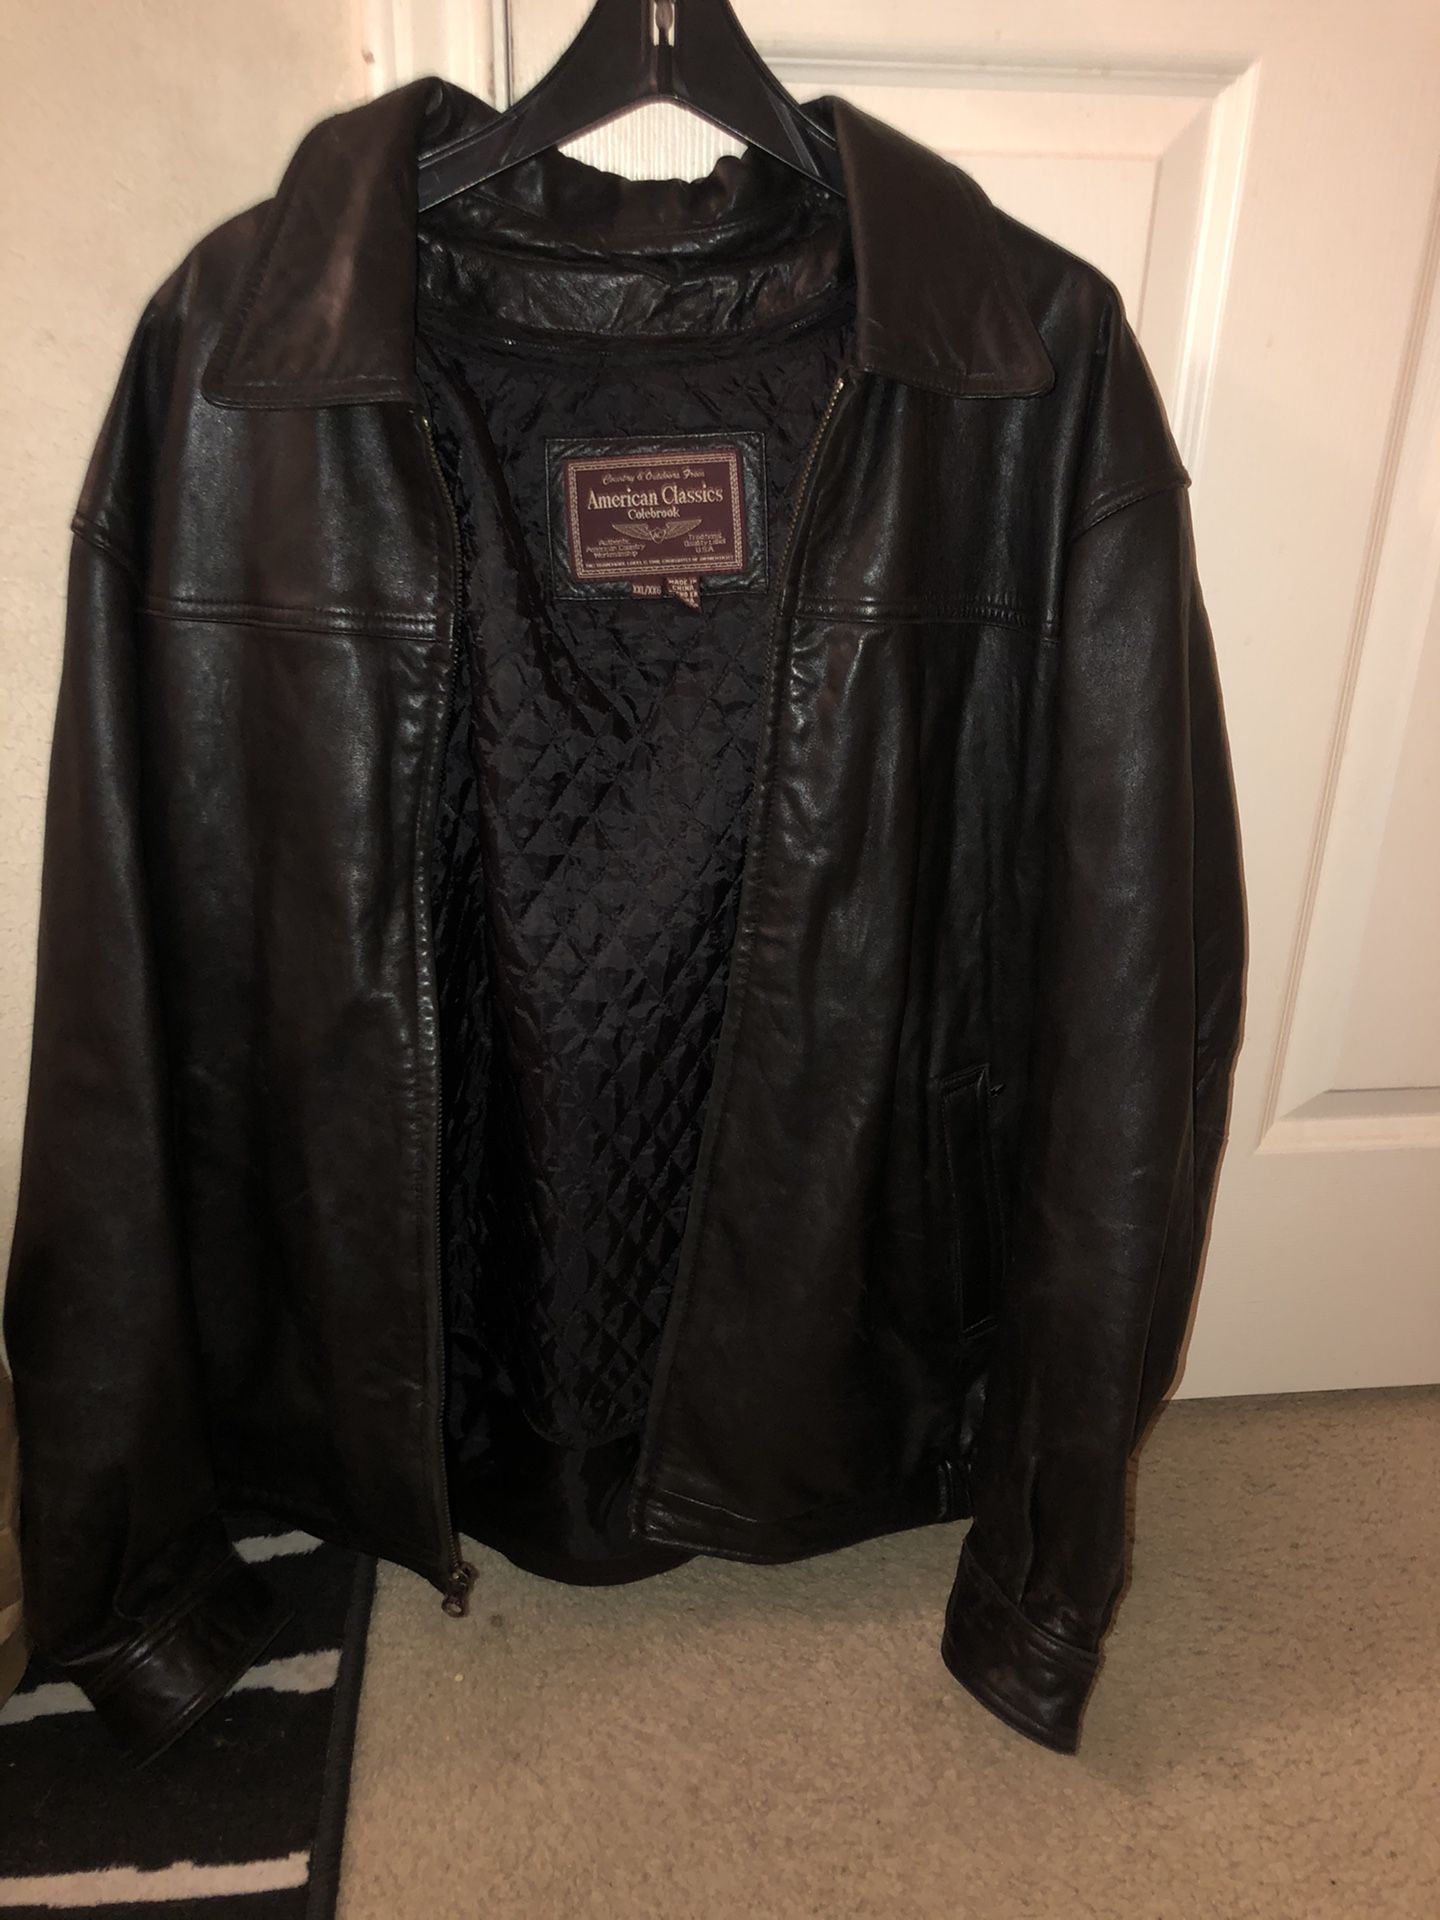 Vintage American Classics Leather Jacket for Sale in SIENNA